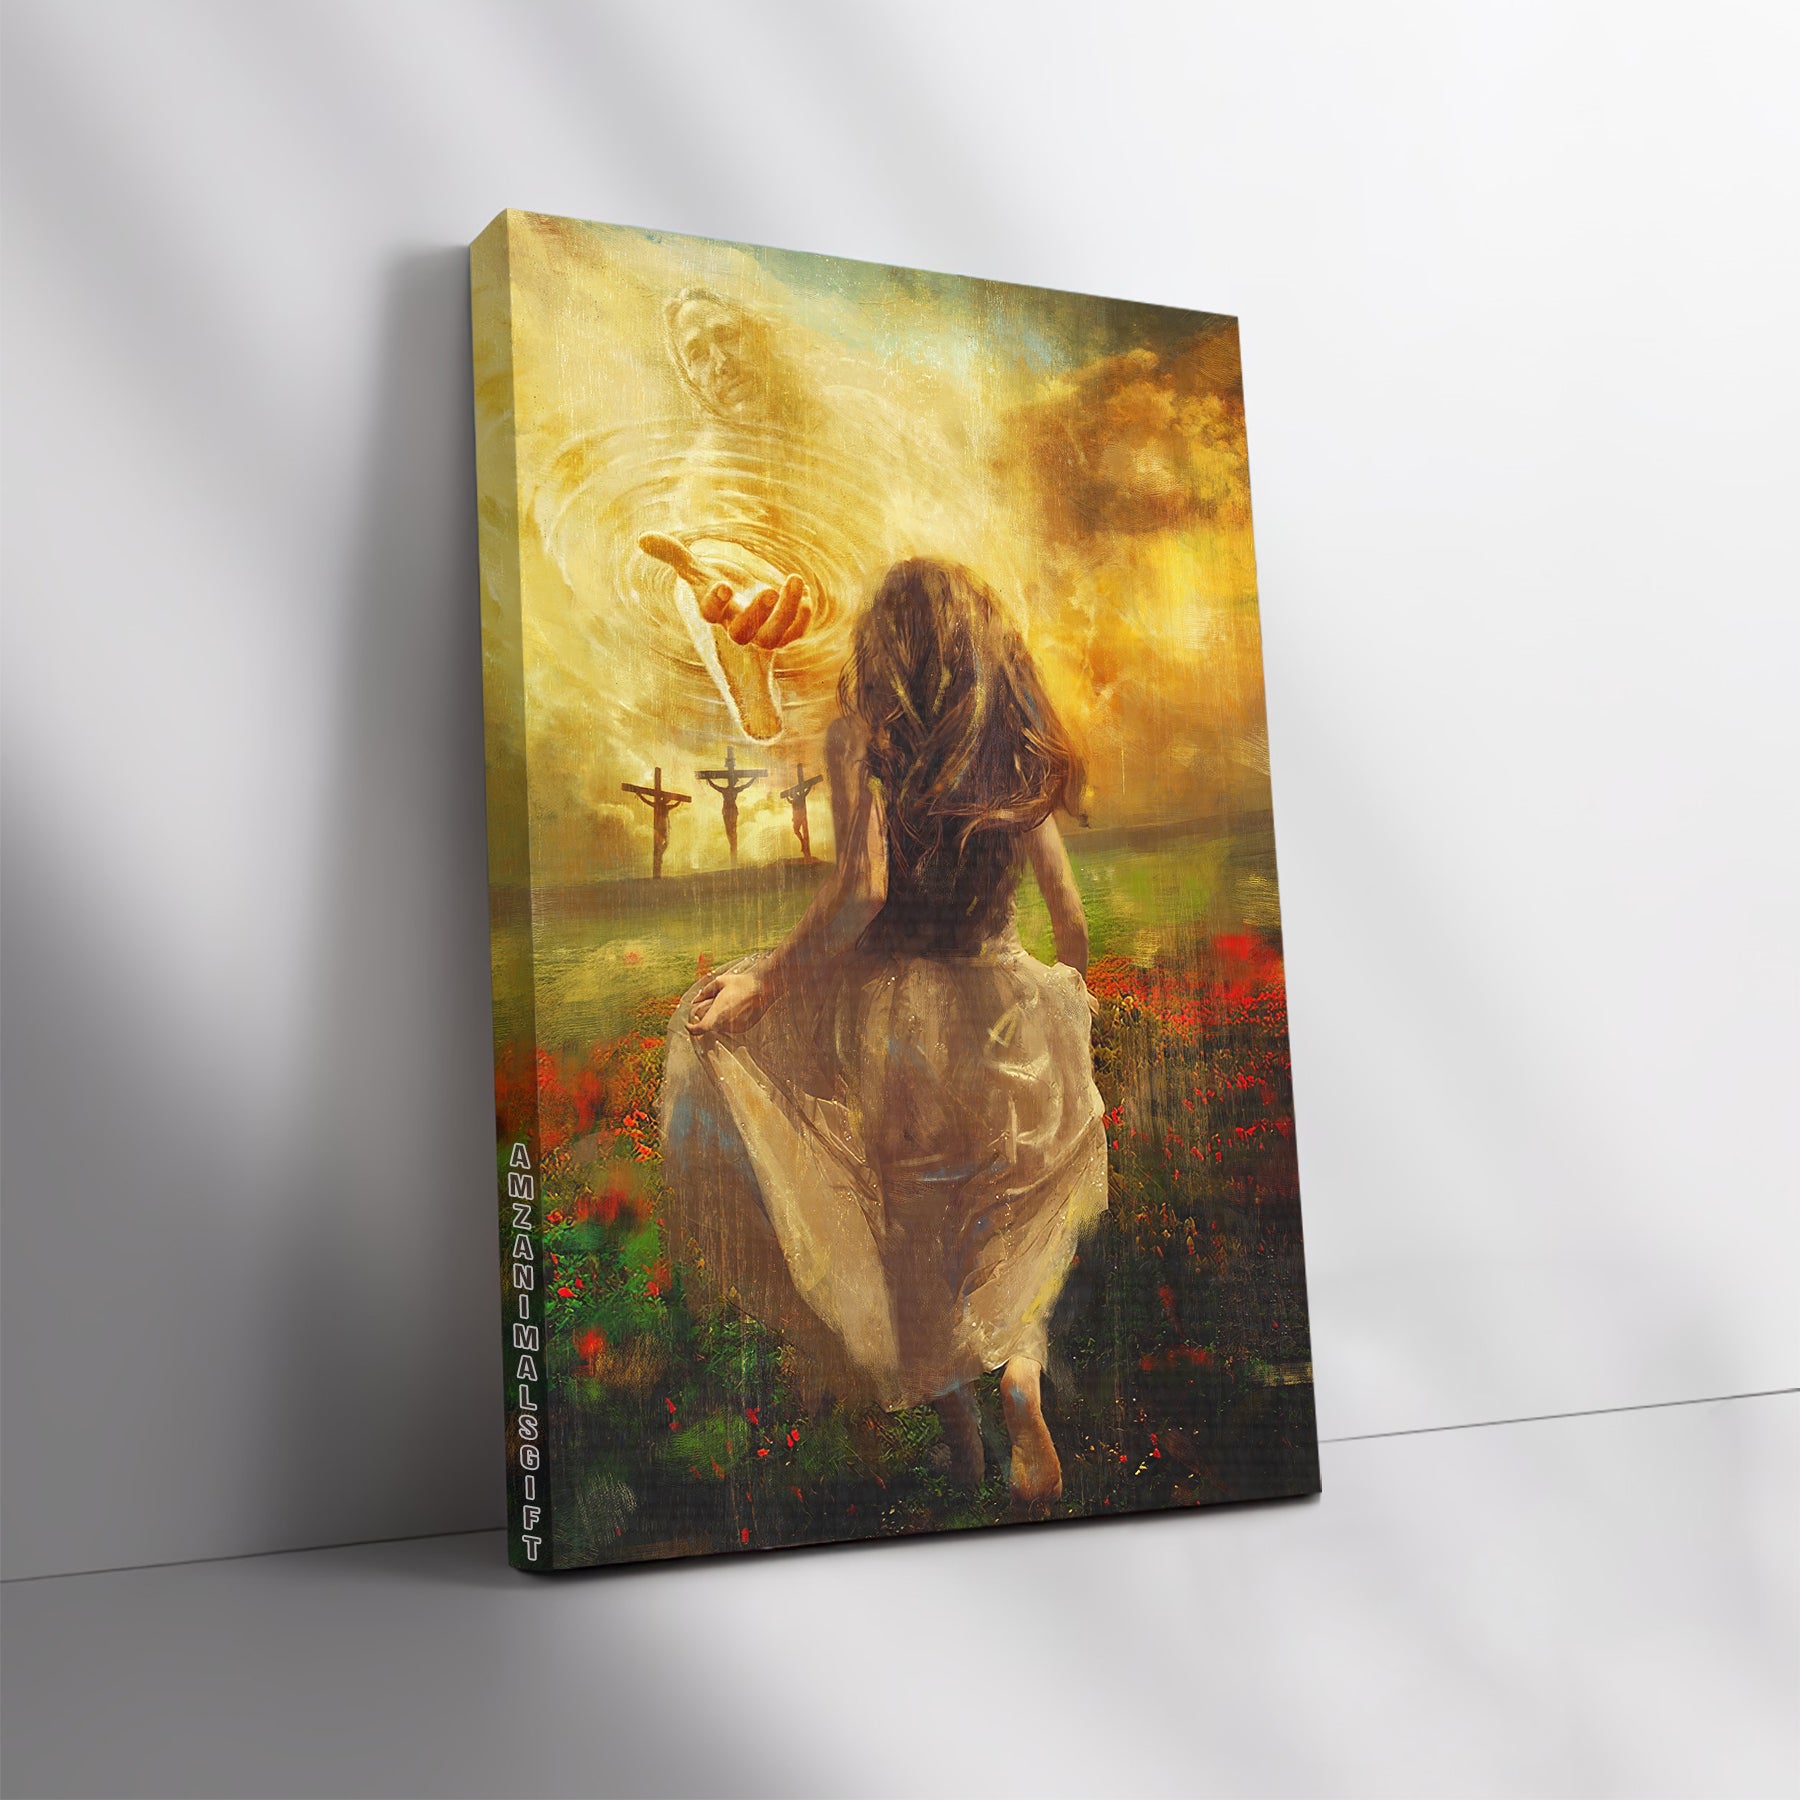 Jesus Portrait Premium Wrapped Canvas - Jesus painting, Beautiful Girl, Into God arms, Run to the beautiful world - Gift for Christian, Friends, Family